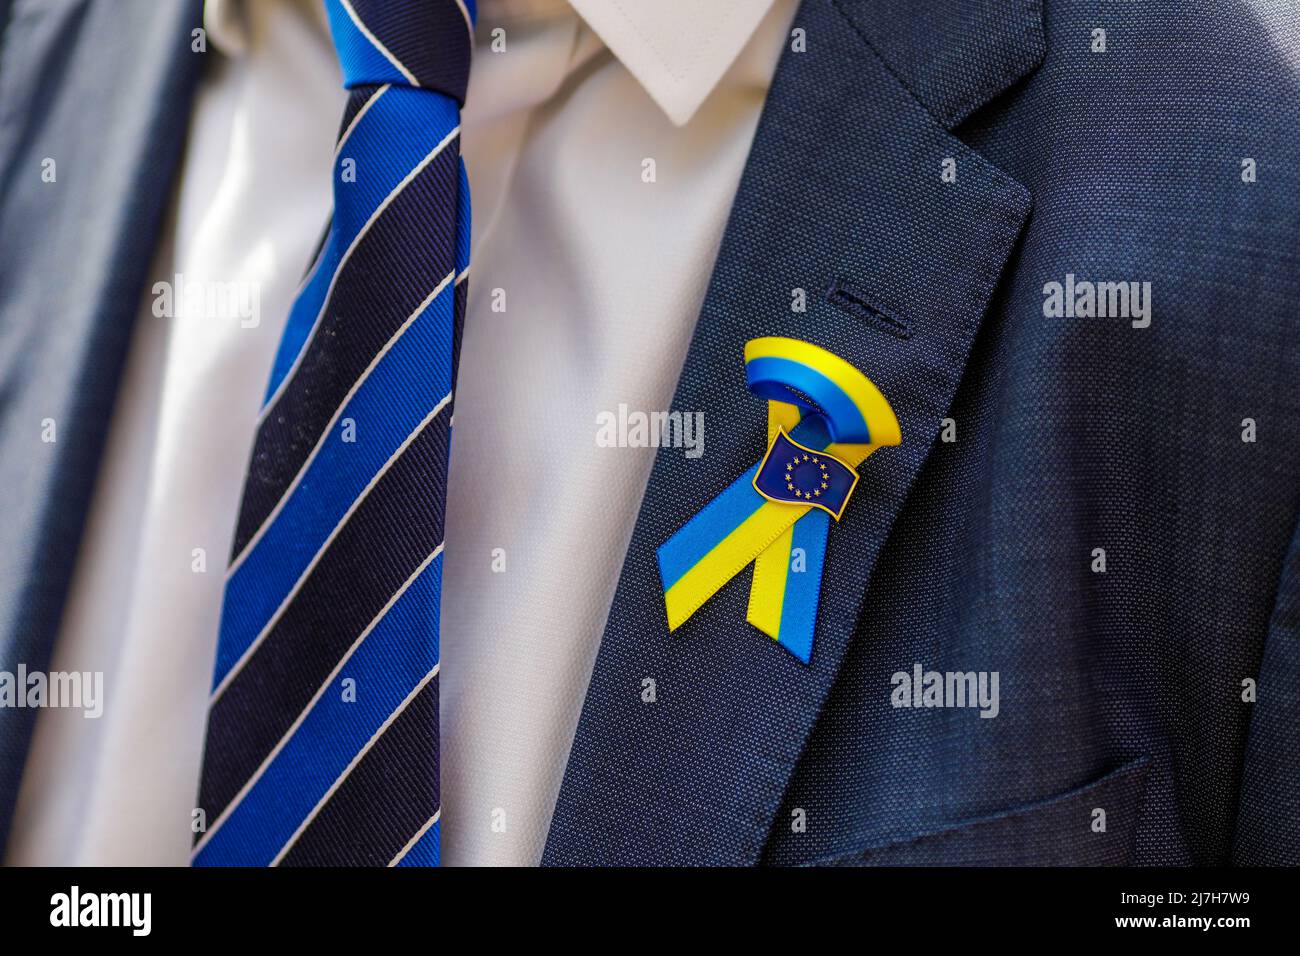 Bucharest, Romania - May 9, 2022: Shallow depth of field (selective focus) details with the Ukrainian flag and the European Union logo on the suit of Stock Photo